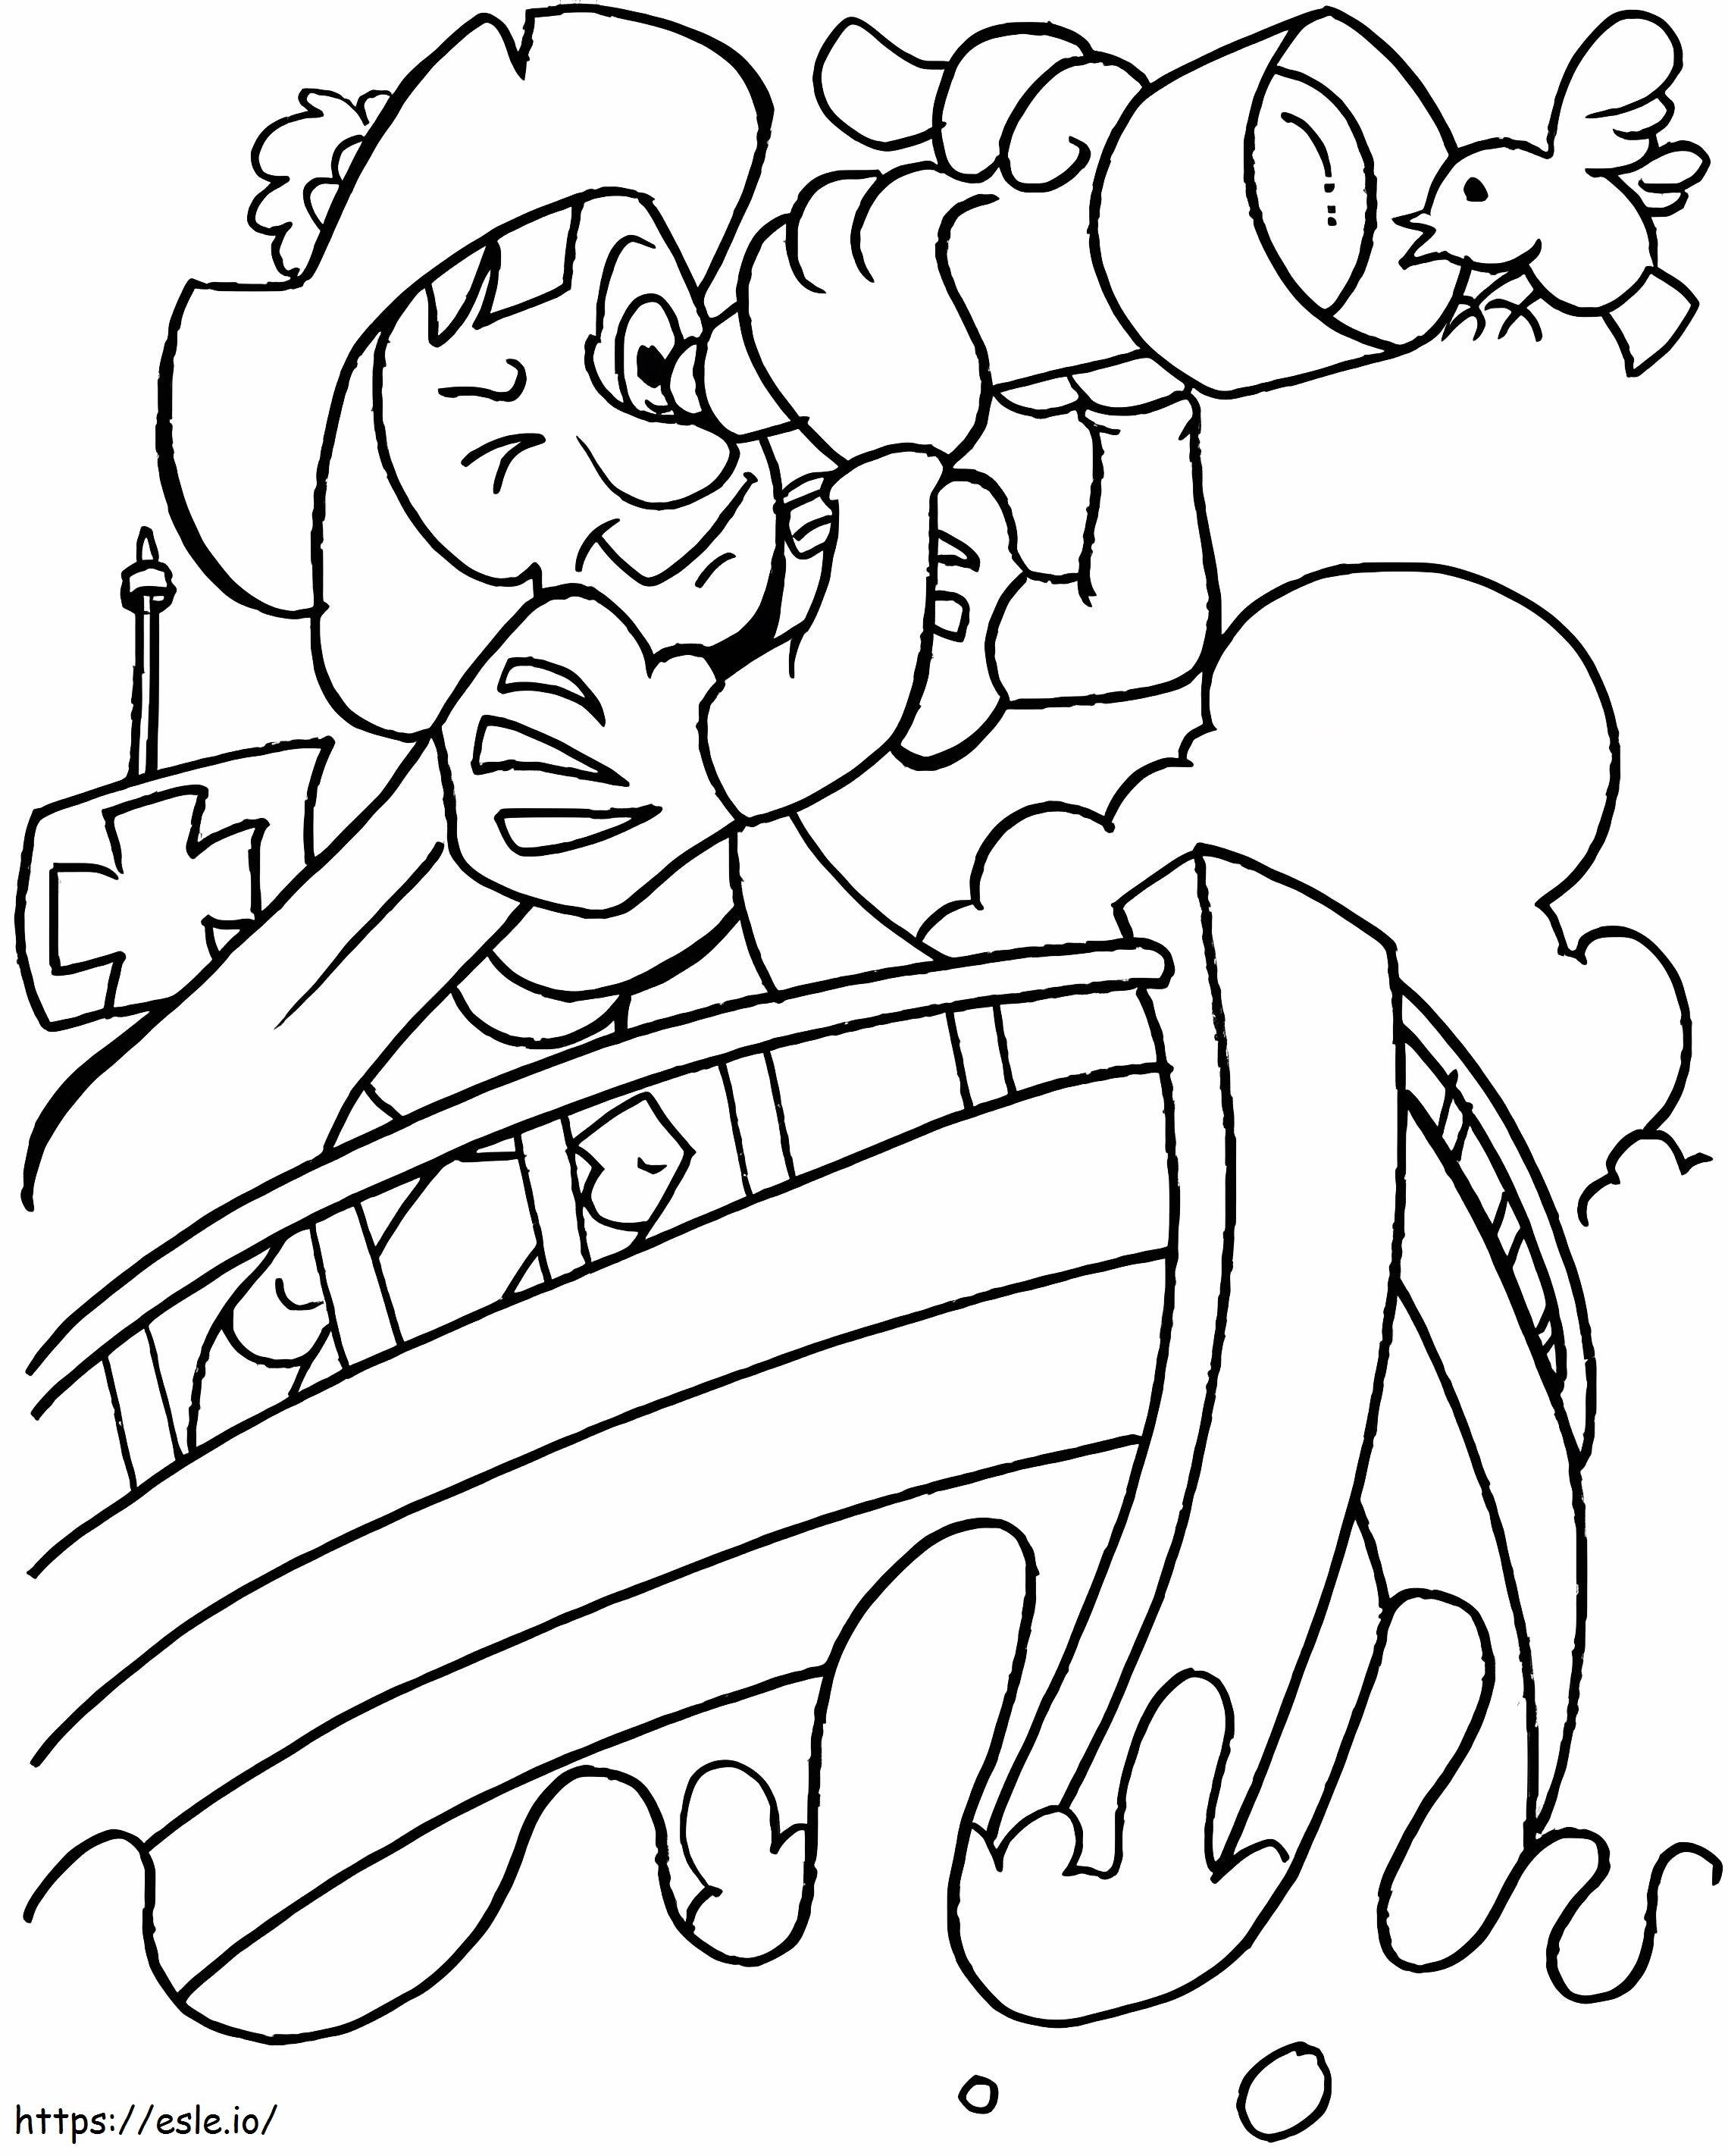 Christopher Columbus 7 coloring page